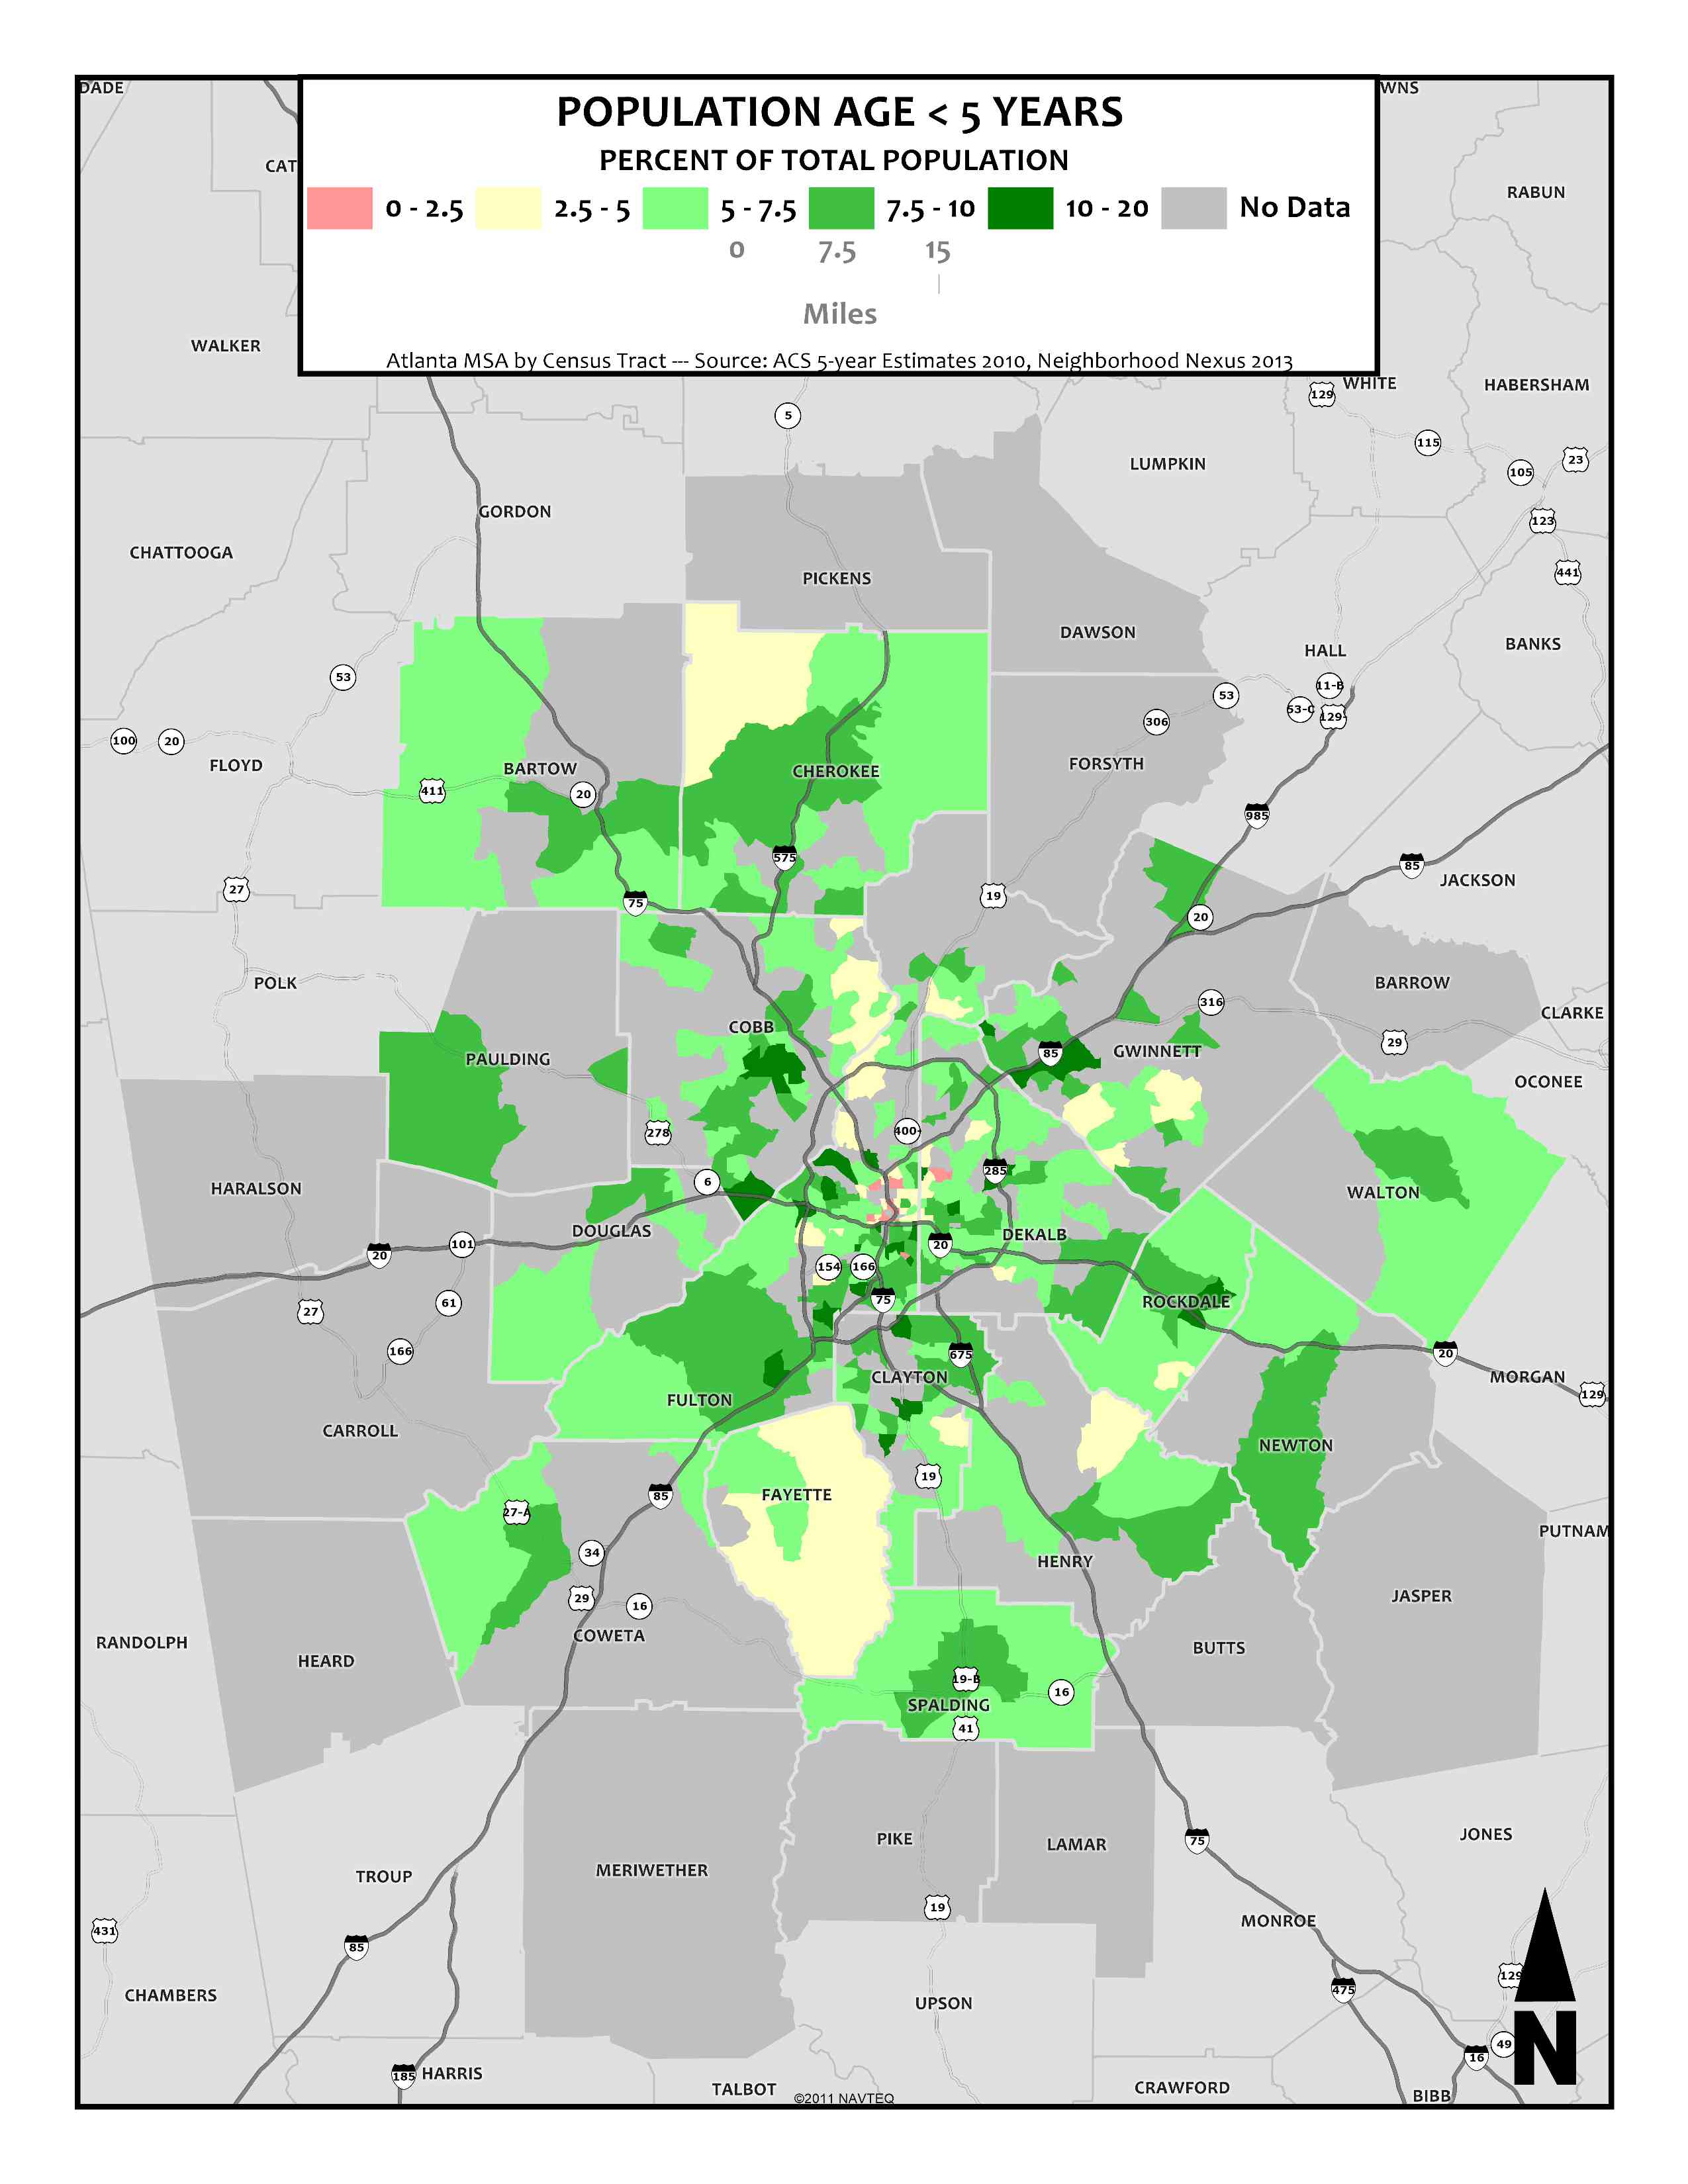 Population Age < 5 Years - metro tracts